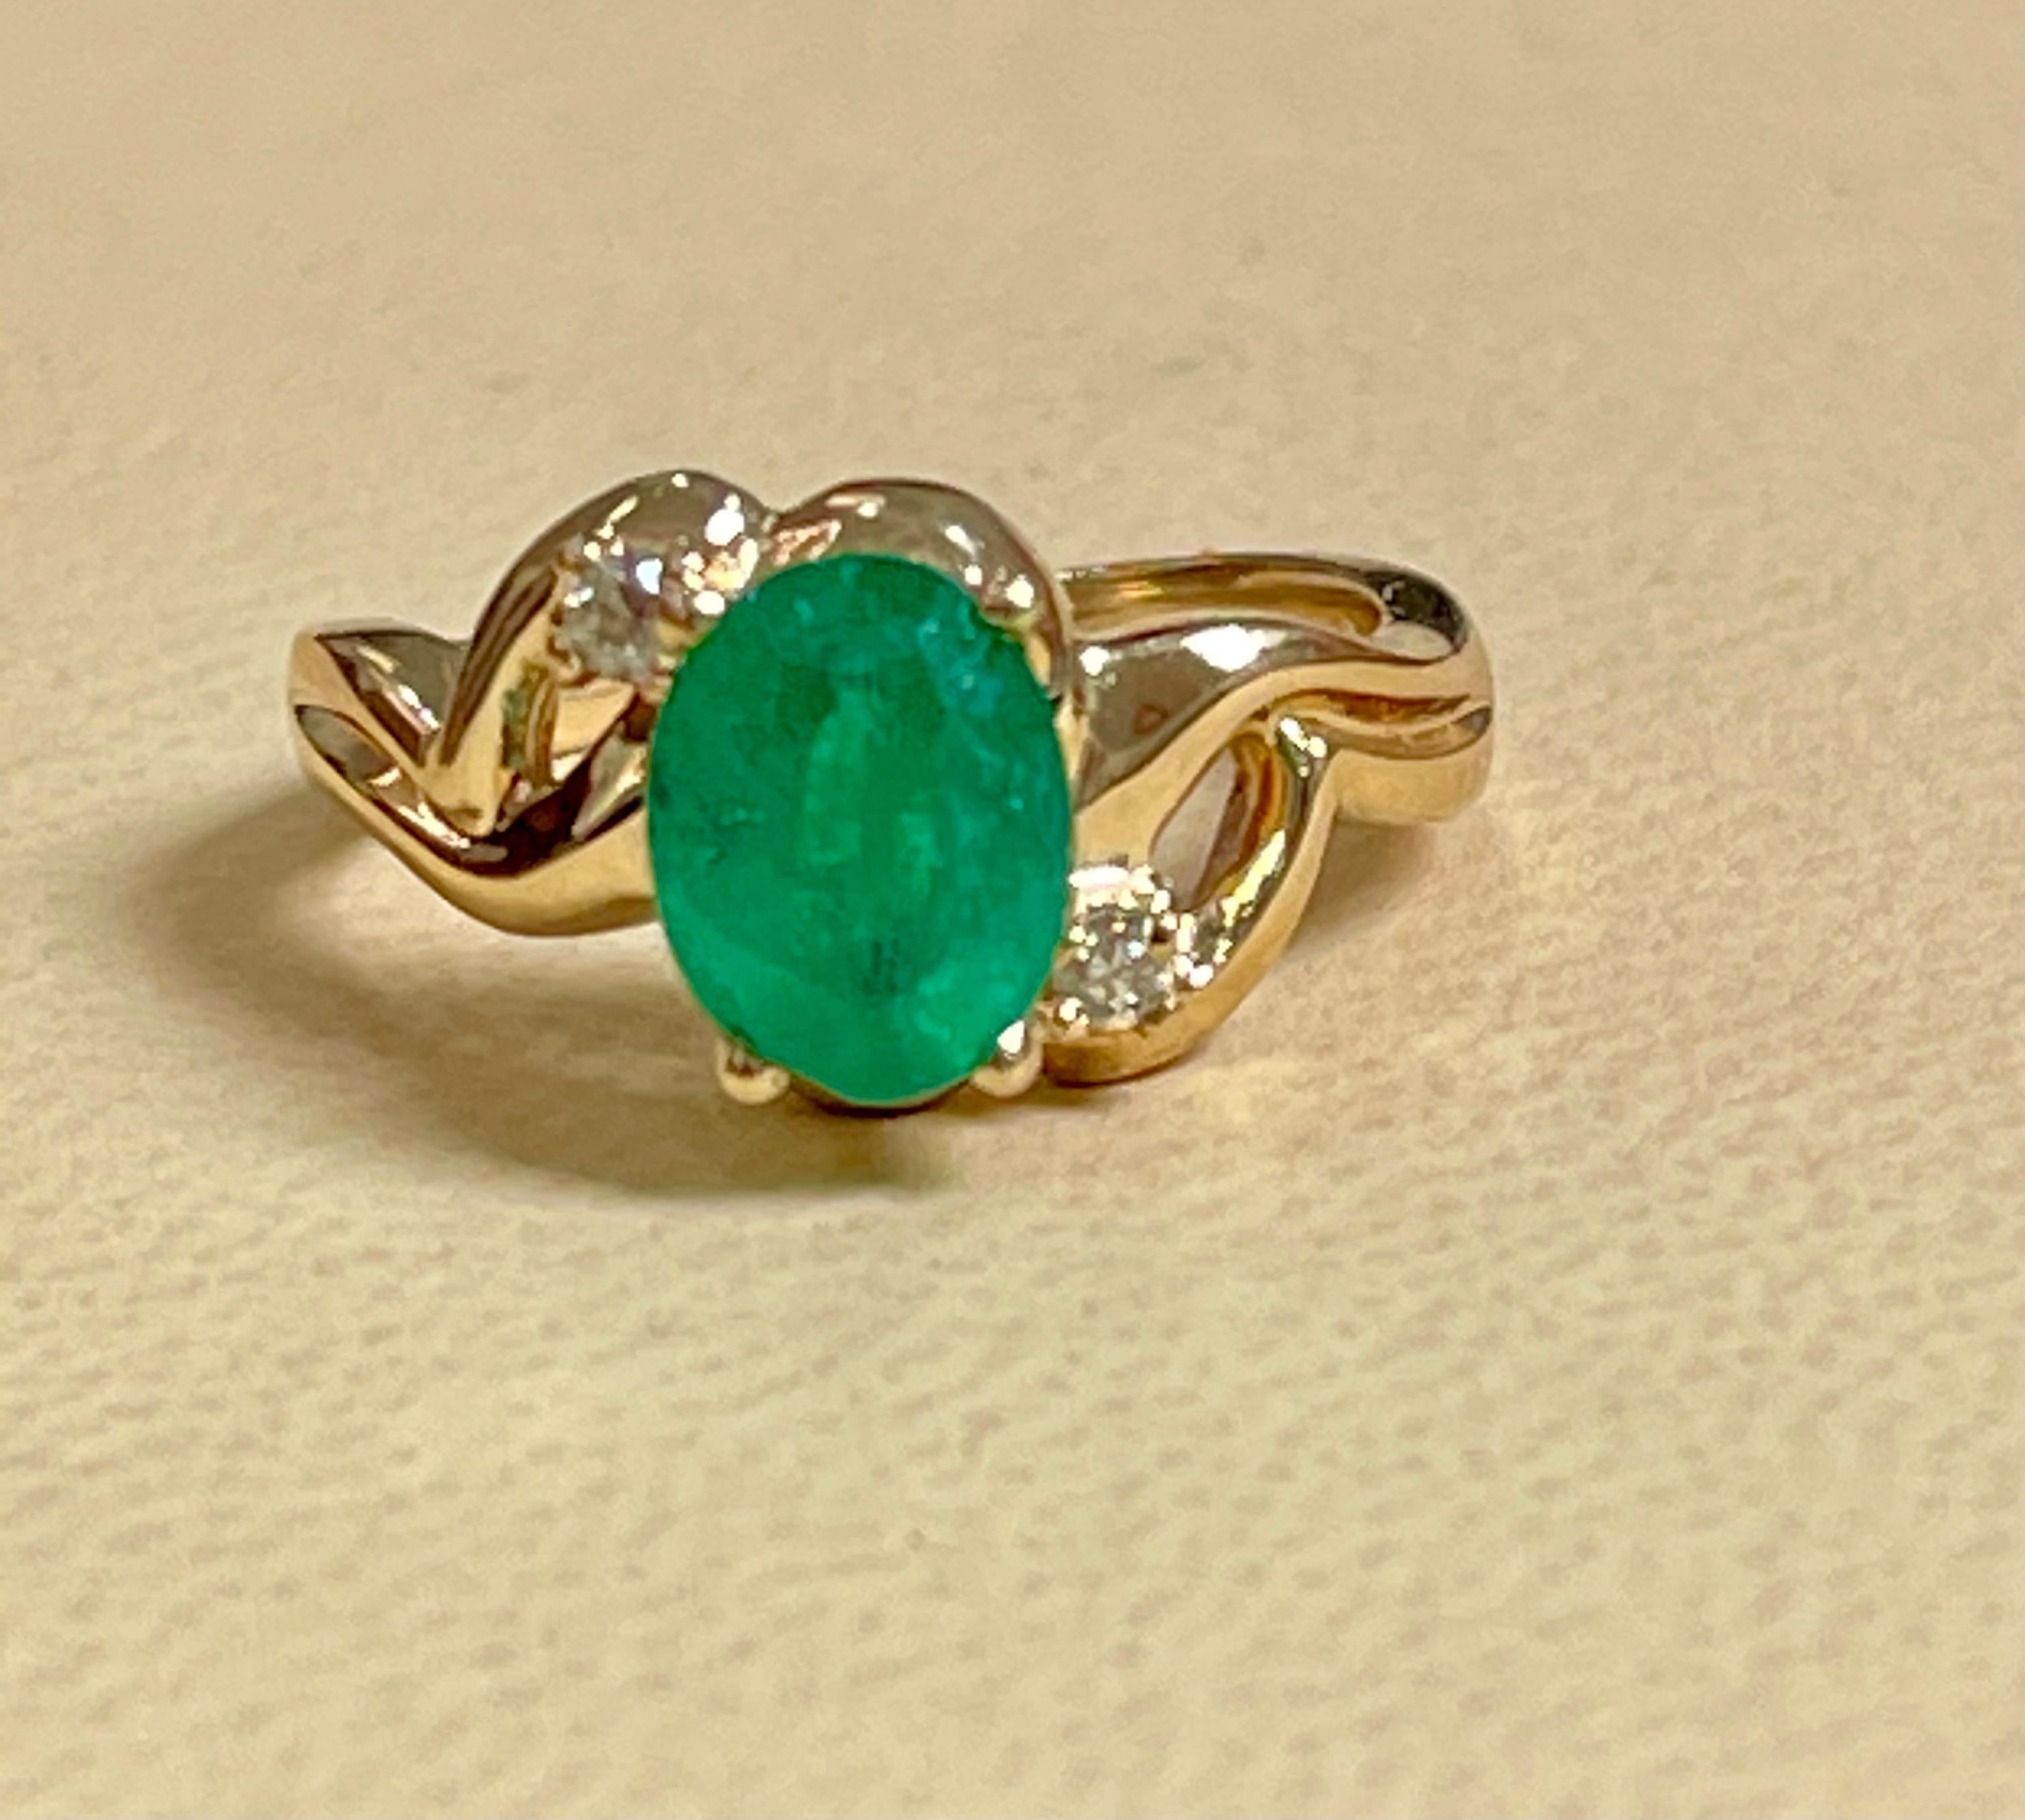 1.8 Carat Natural Oval Emerald and Diamond Ring 14 Karat Yellow Gold For Sale 4